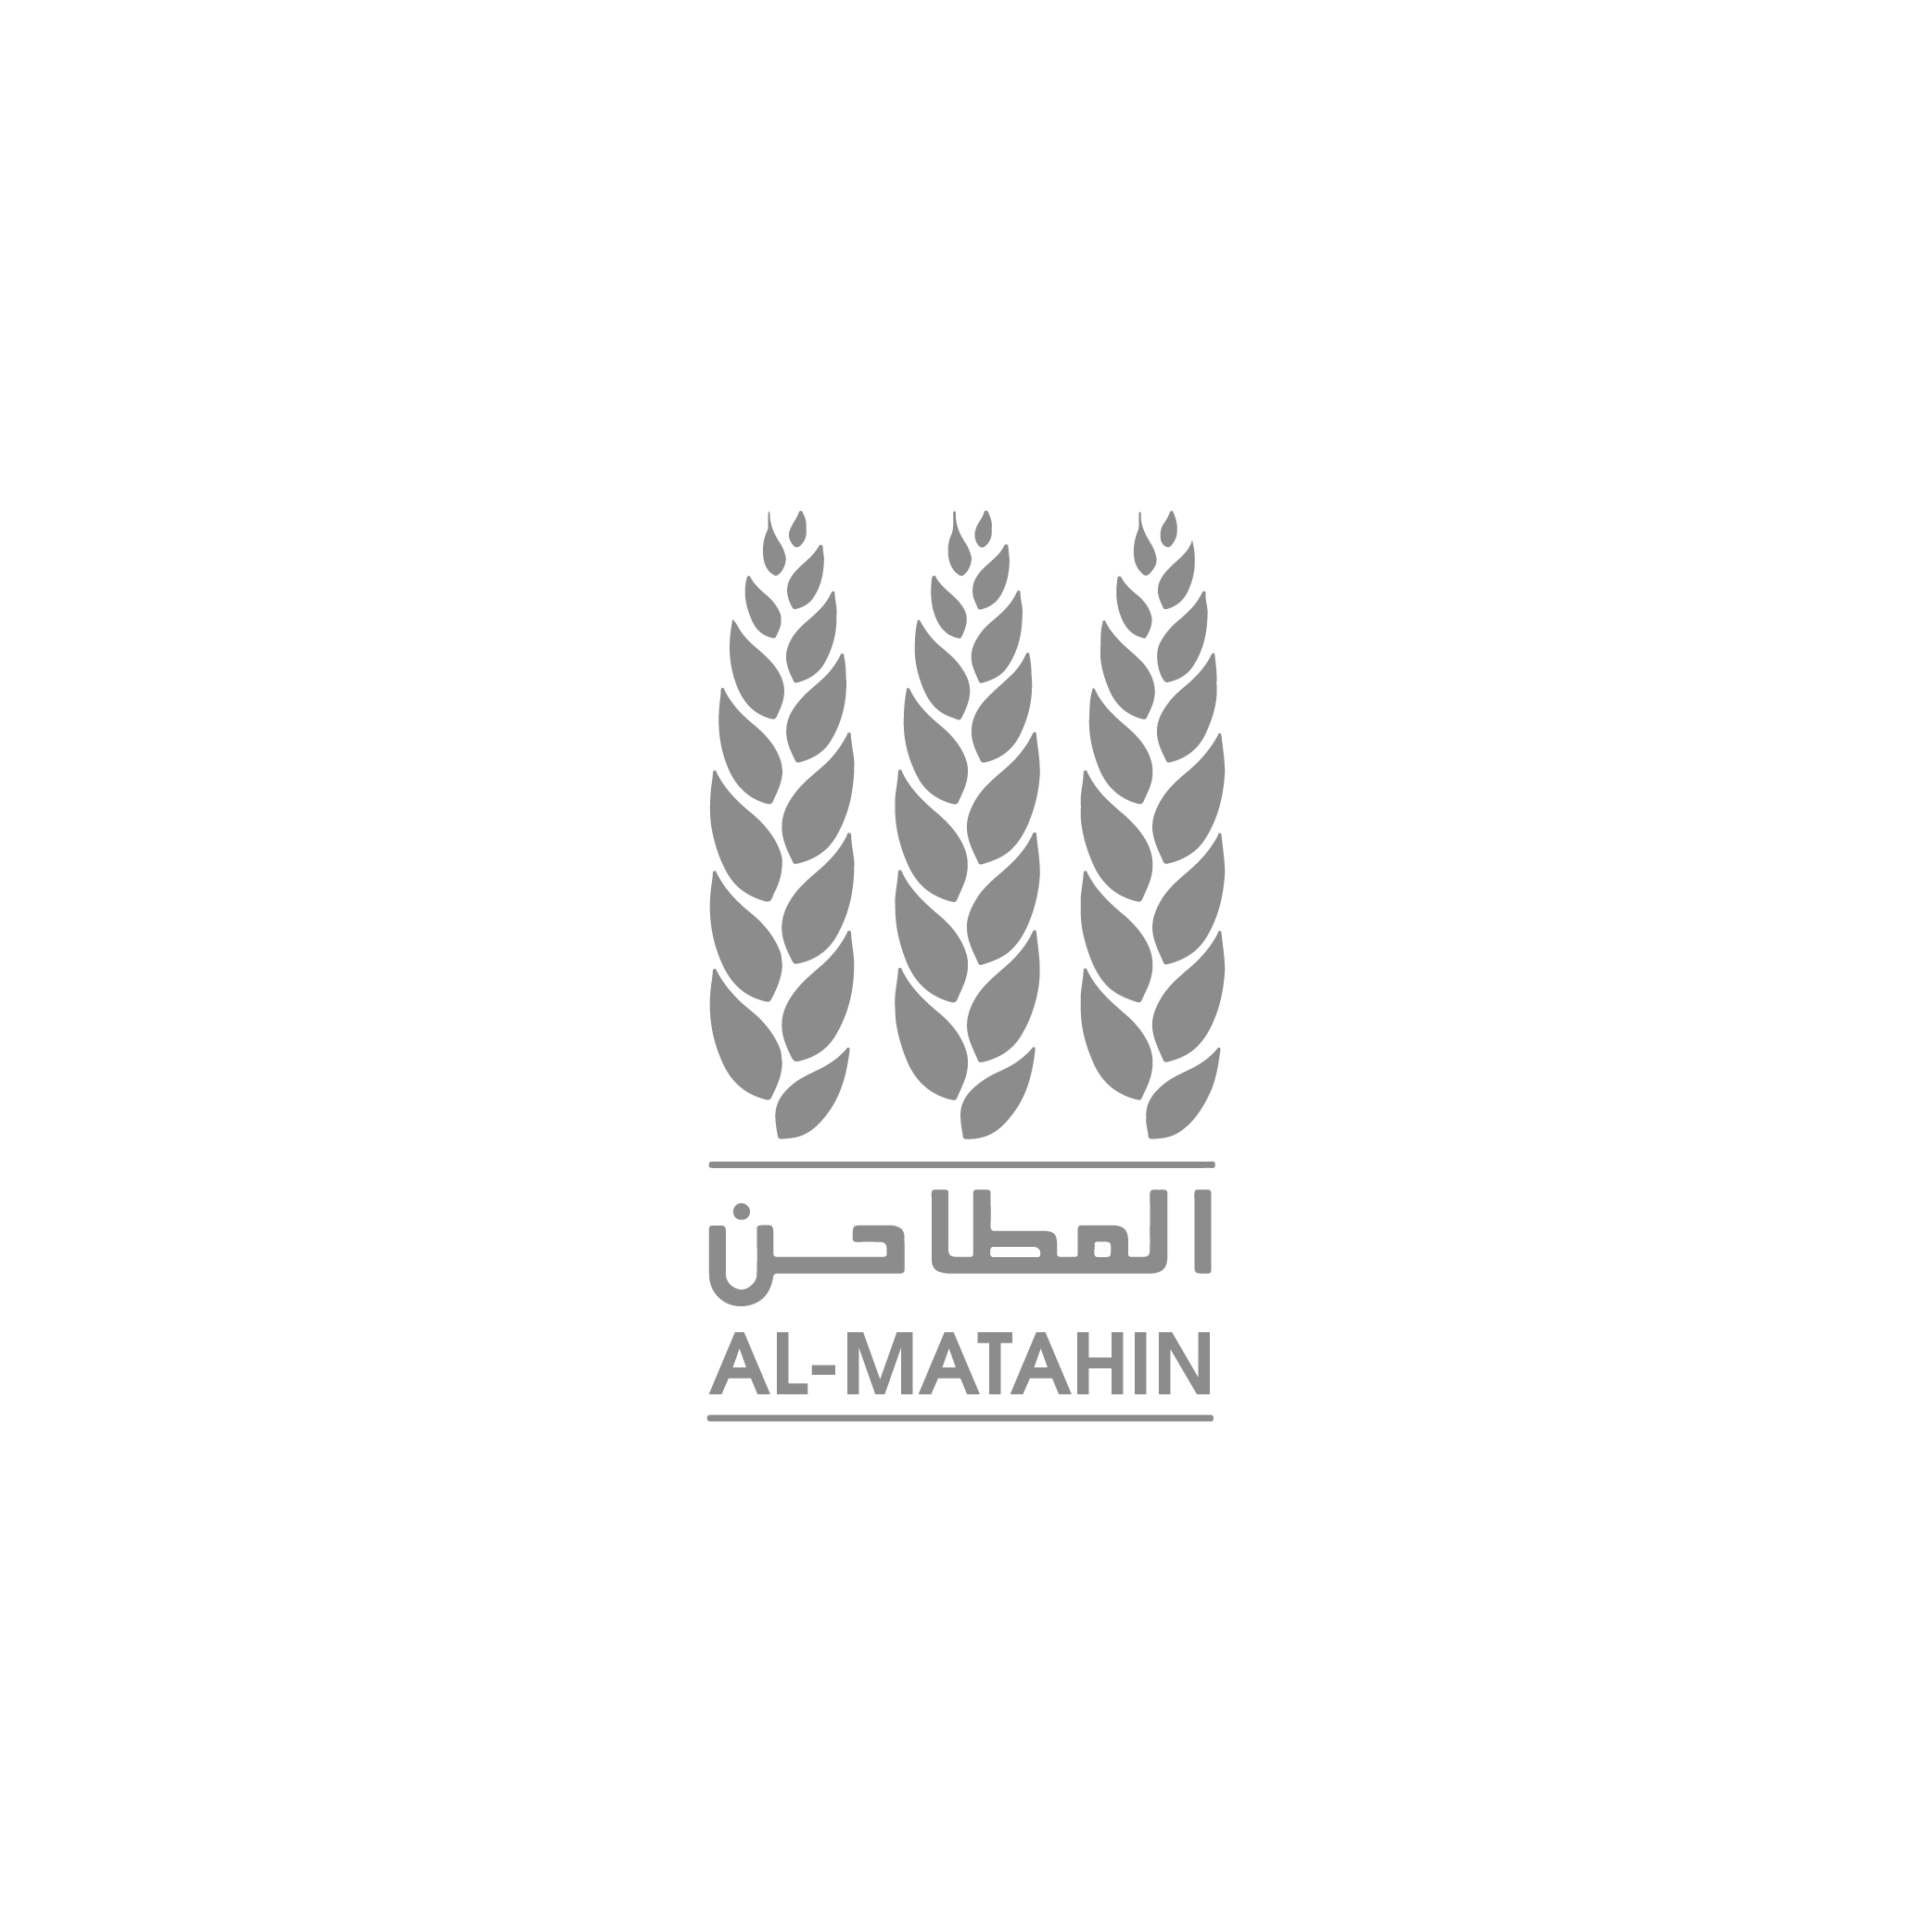 Al Matahin Produce 2000 Bag of Bran Which Are Sold in the Local Market